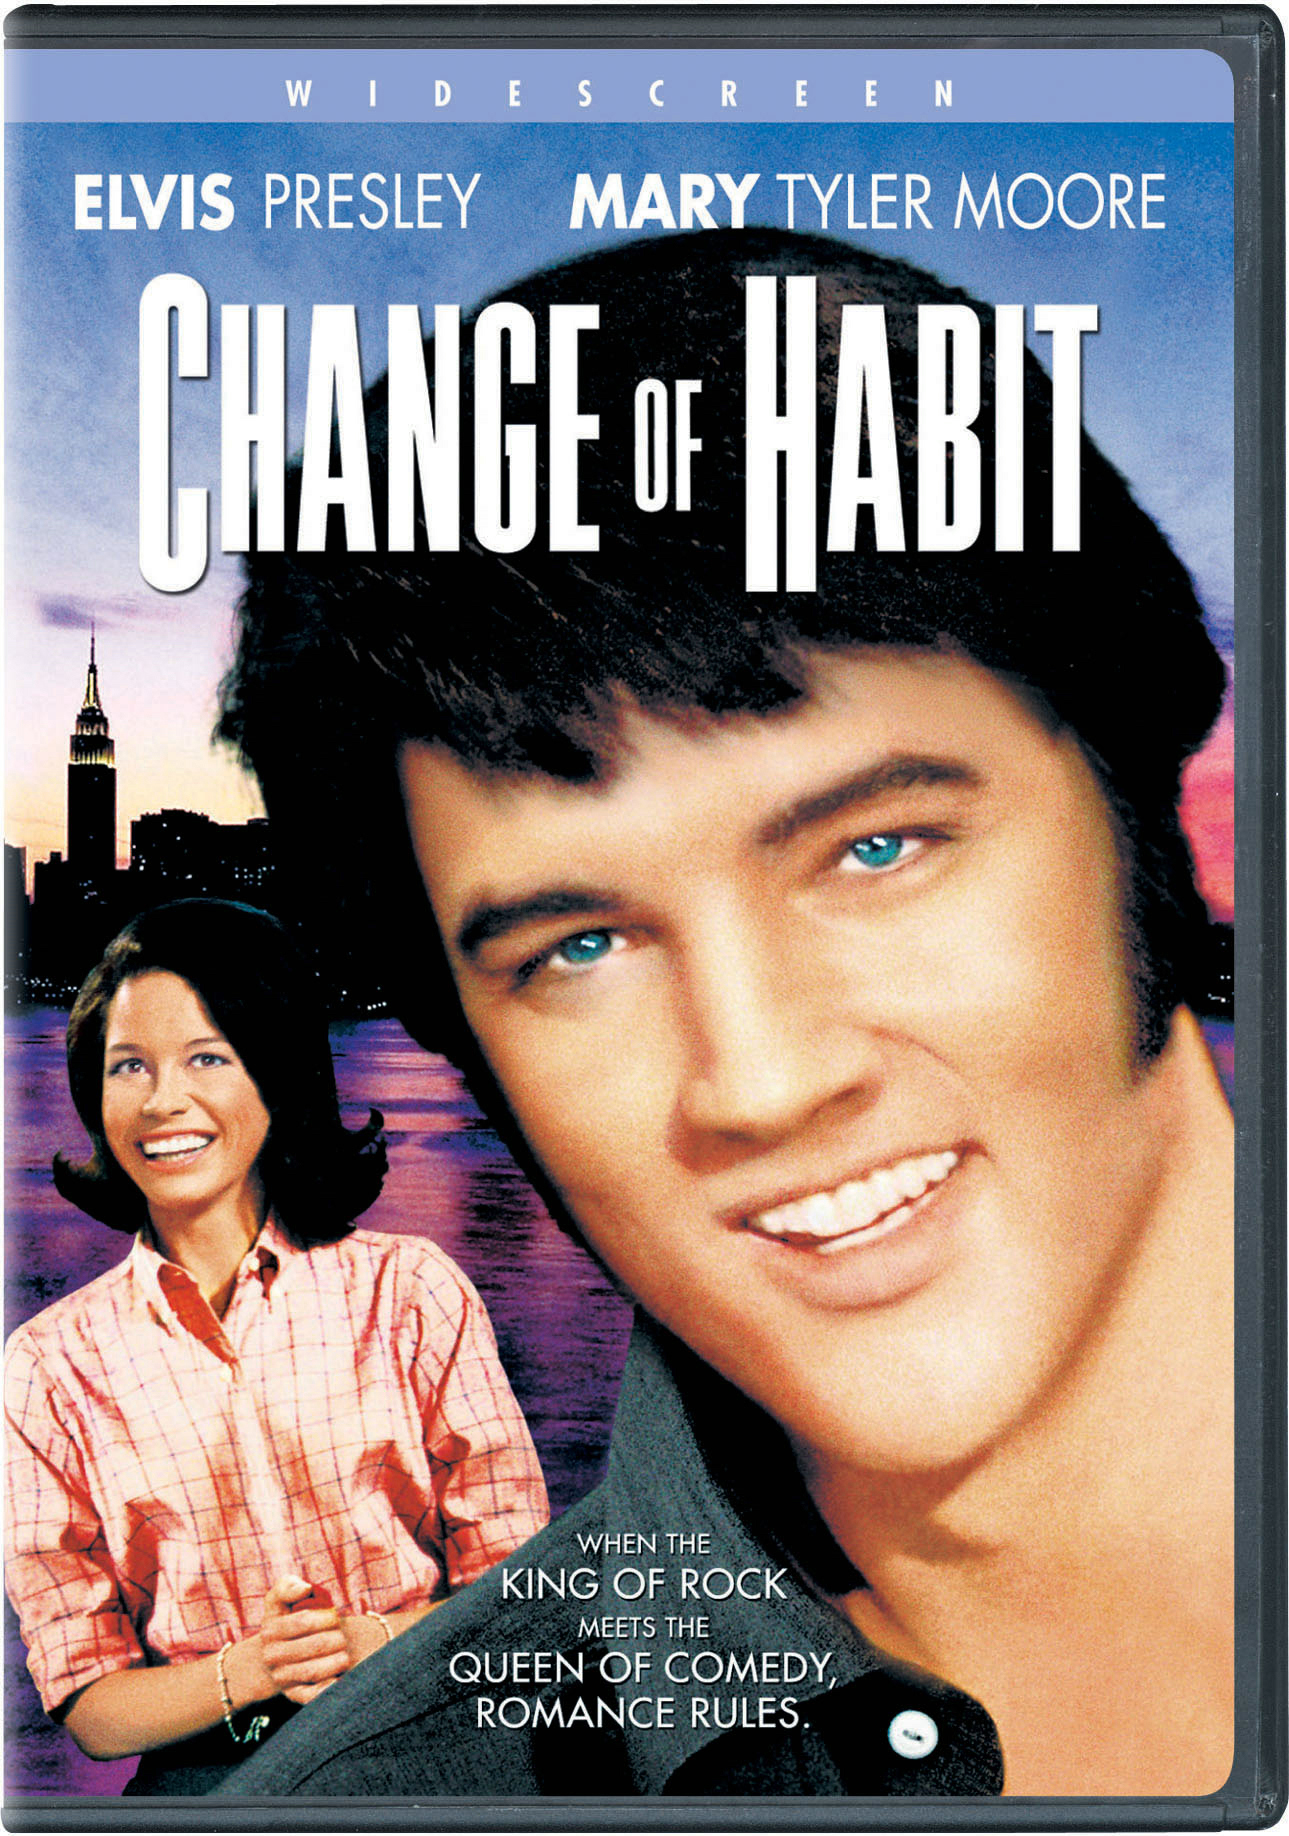 Change Of Habit - DVD [ 1969 ]  - Musical Movies On DVD - Movies On GRUV